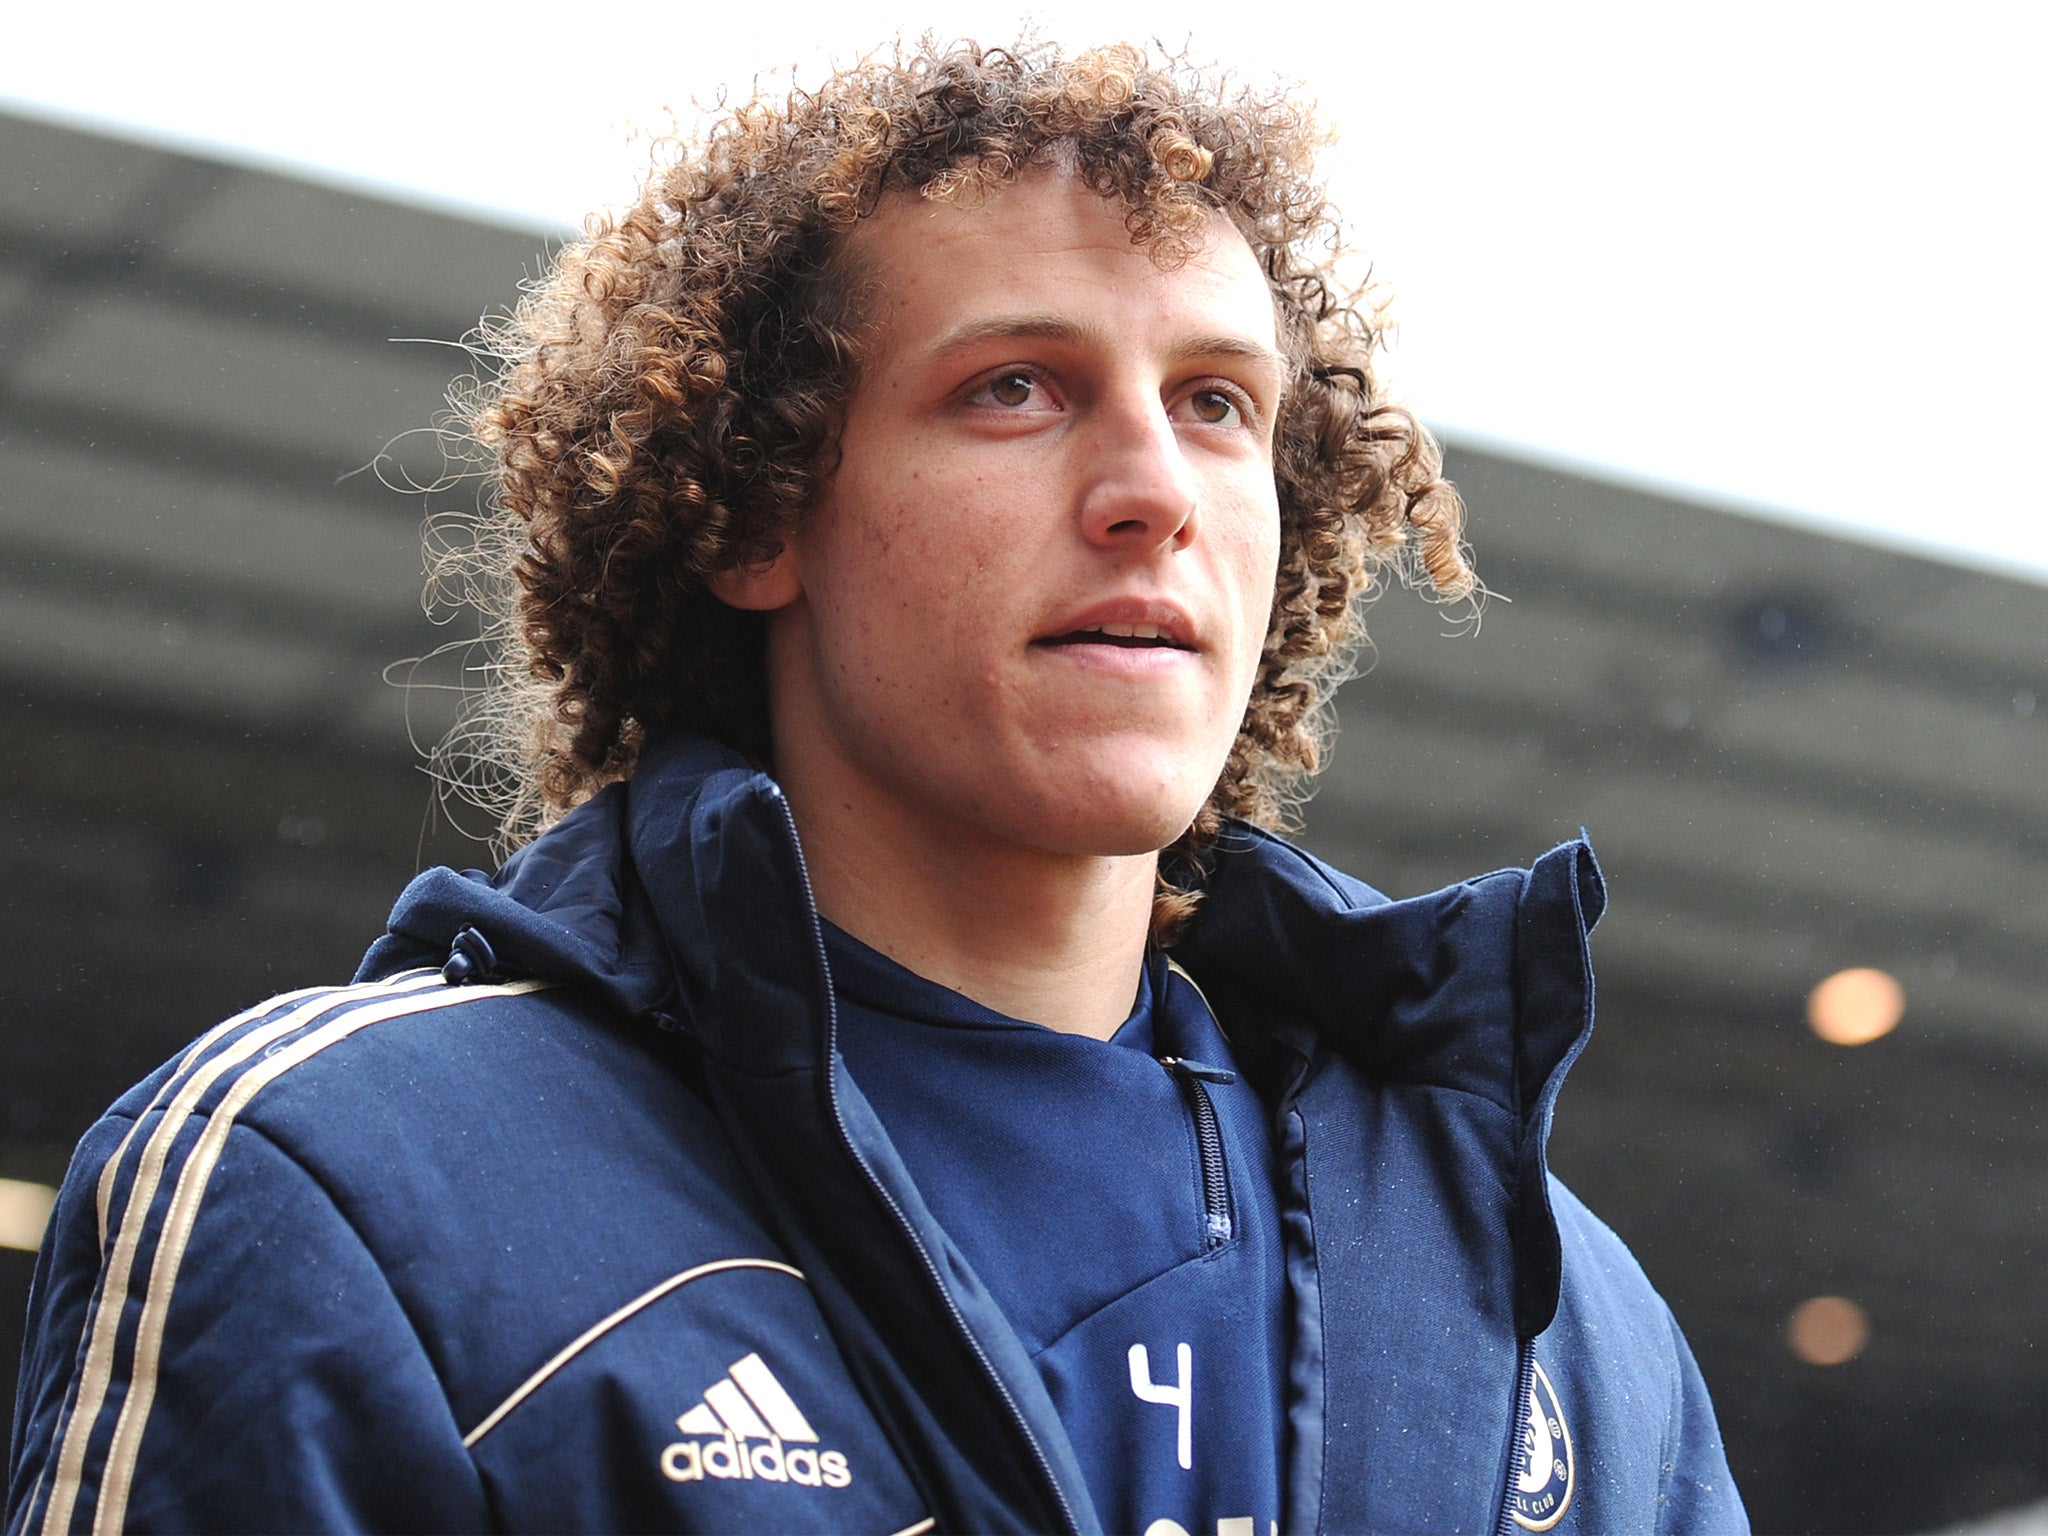 David Luiz spent four years with Benfica before joining Chelsea in January 2011